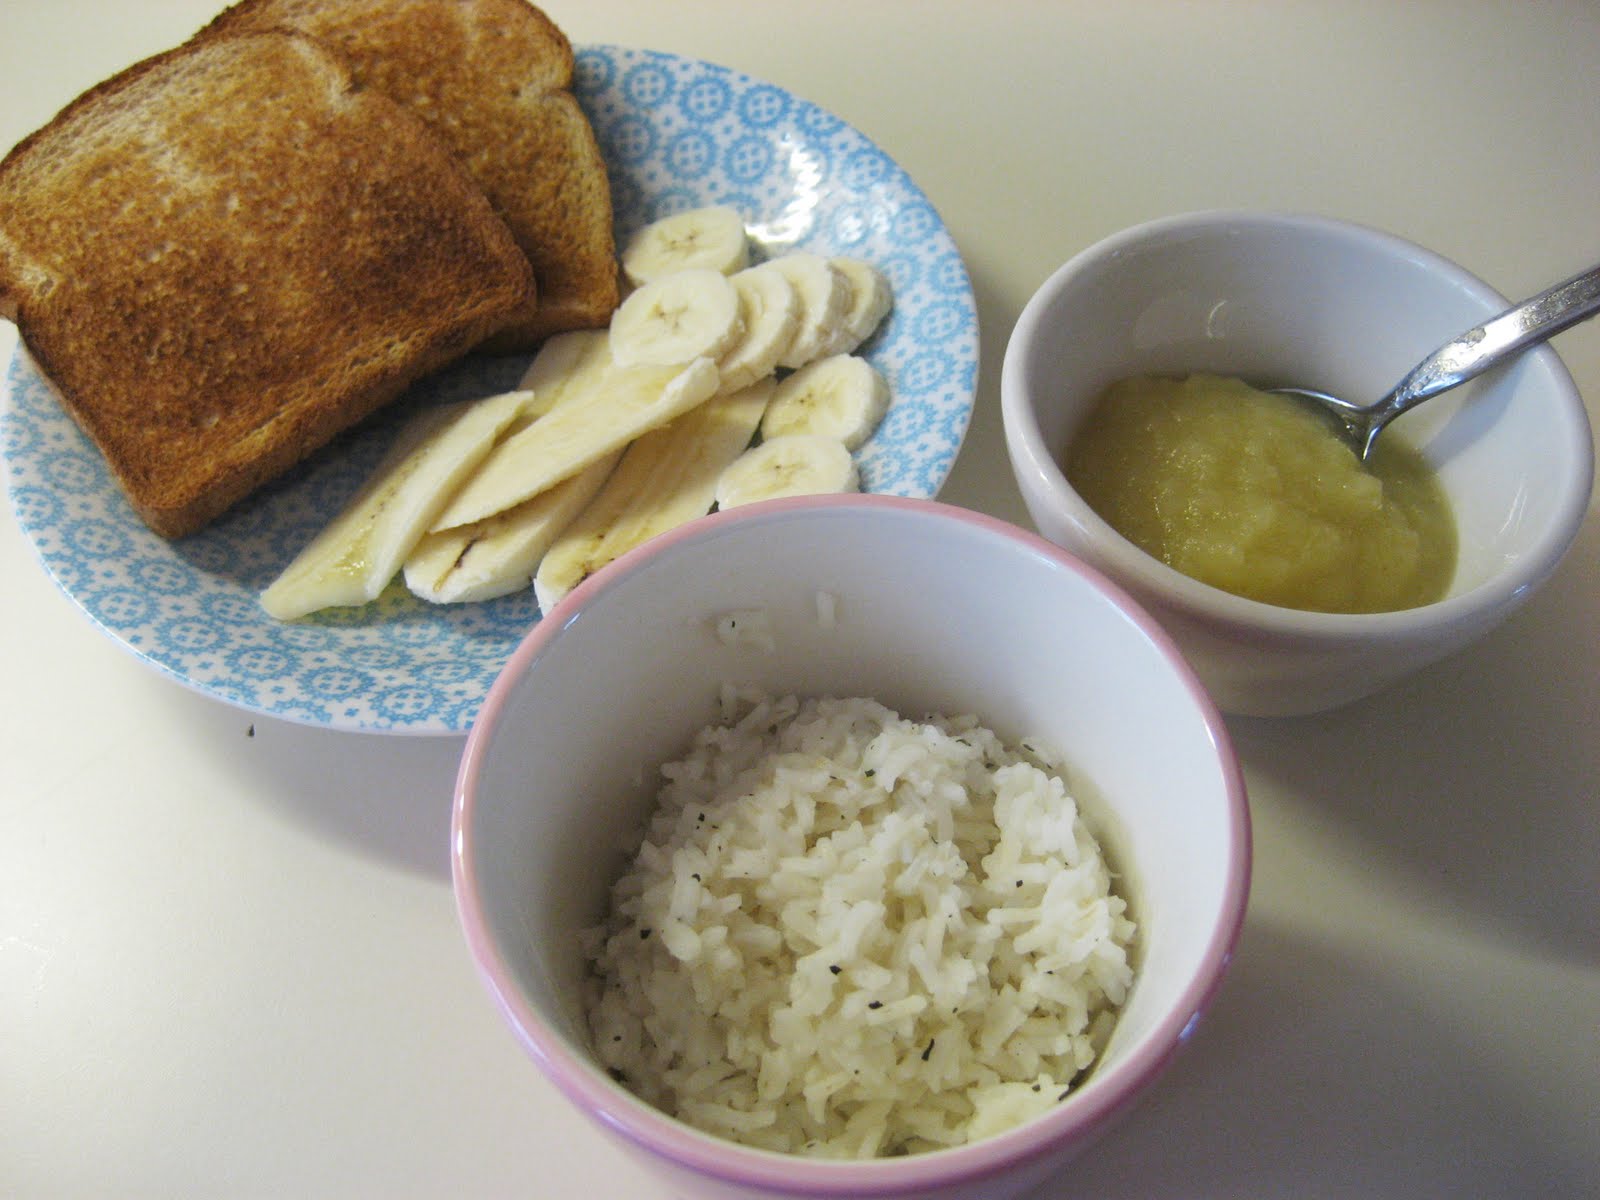 What is the BRAT diet for diarrhea?